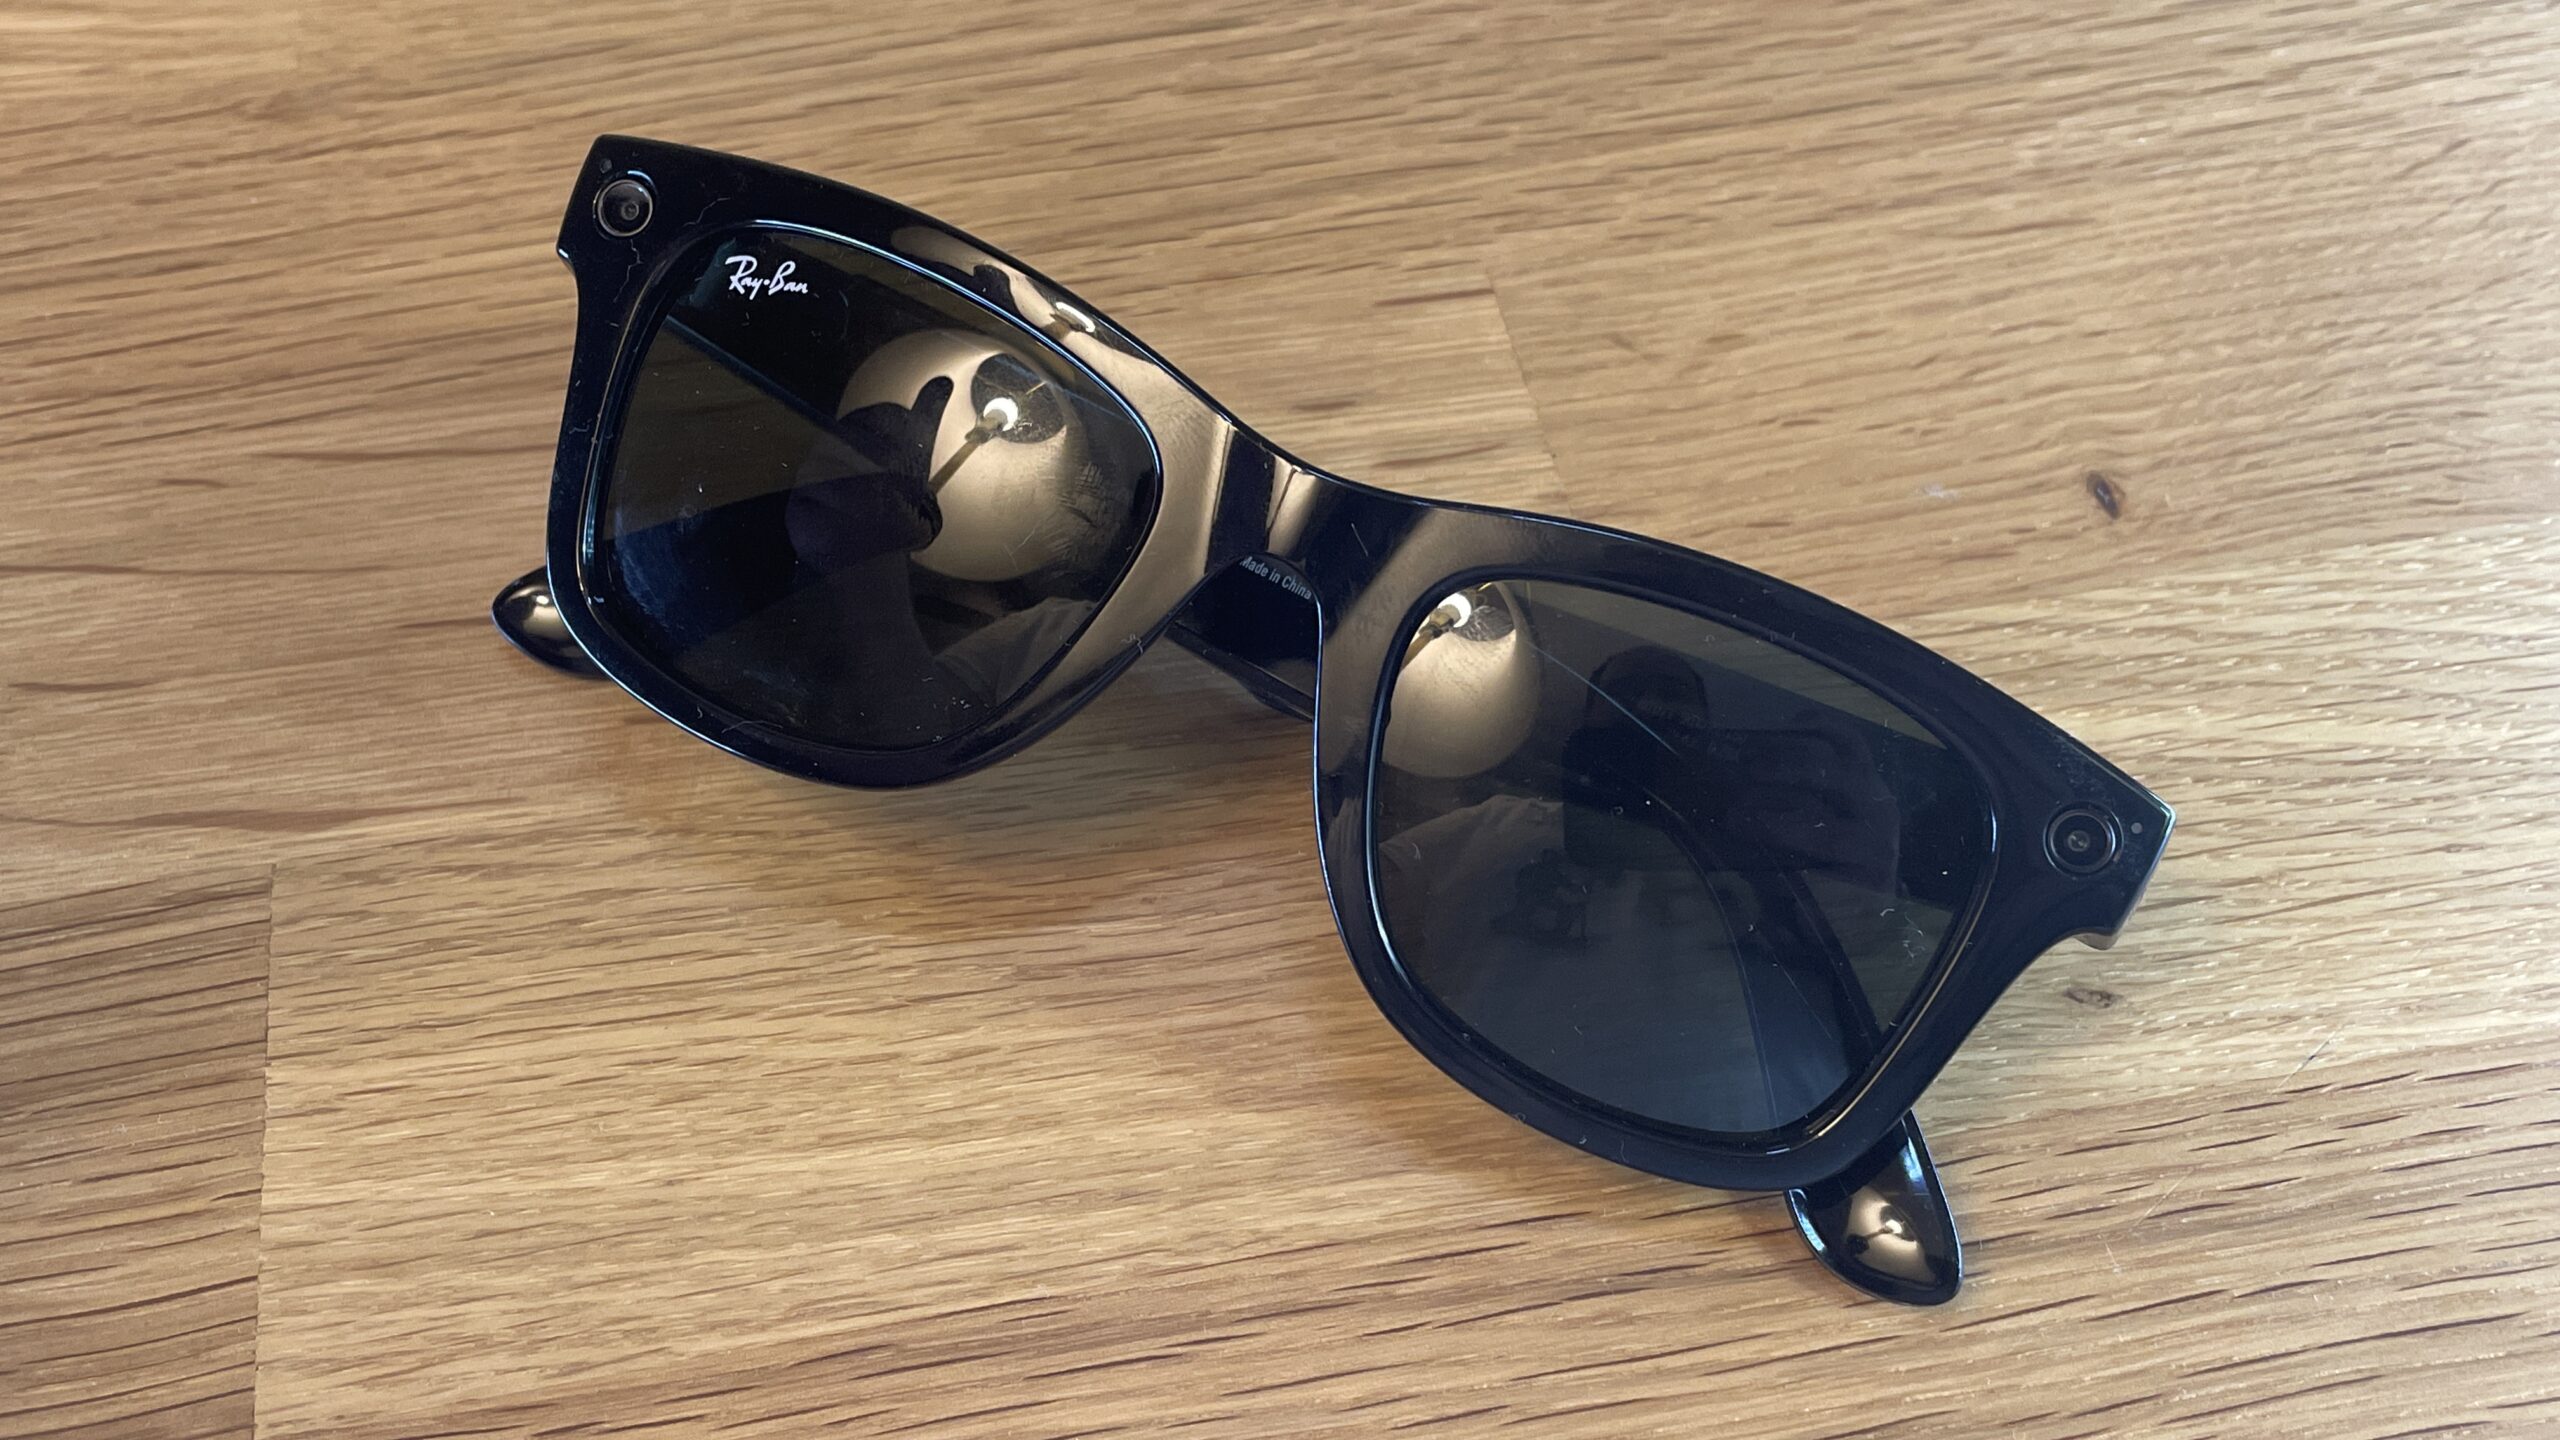 Ray-Ban Stories Smart Sunglasses Review | Popular Science